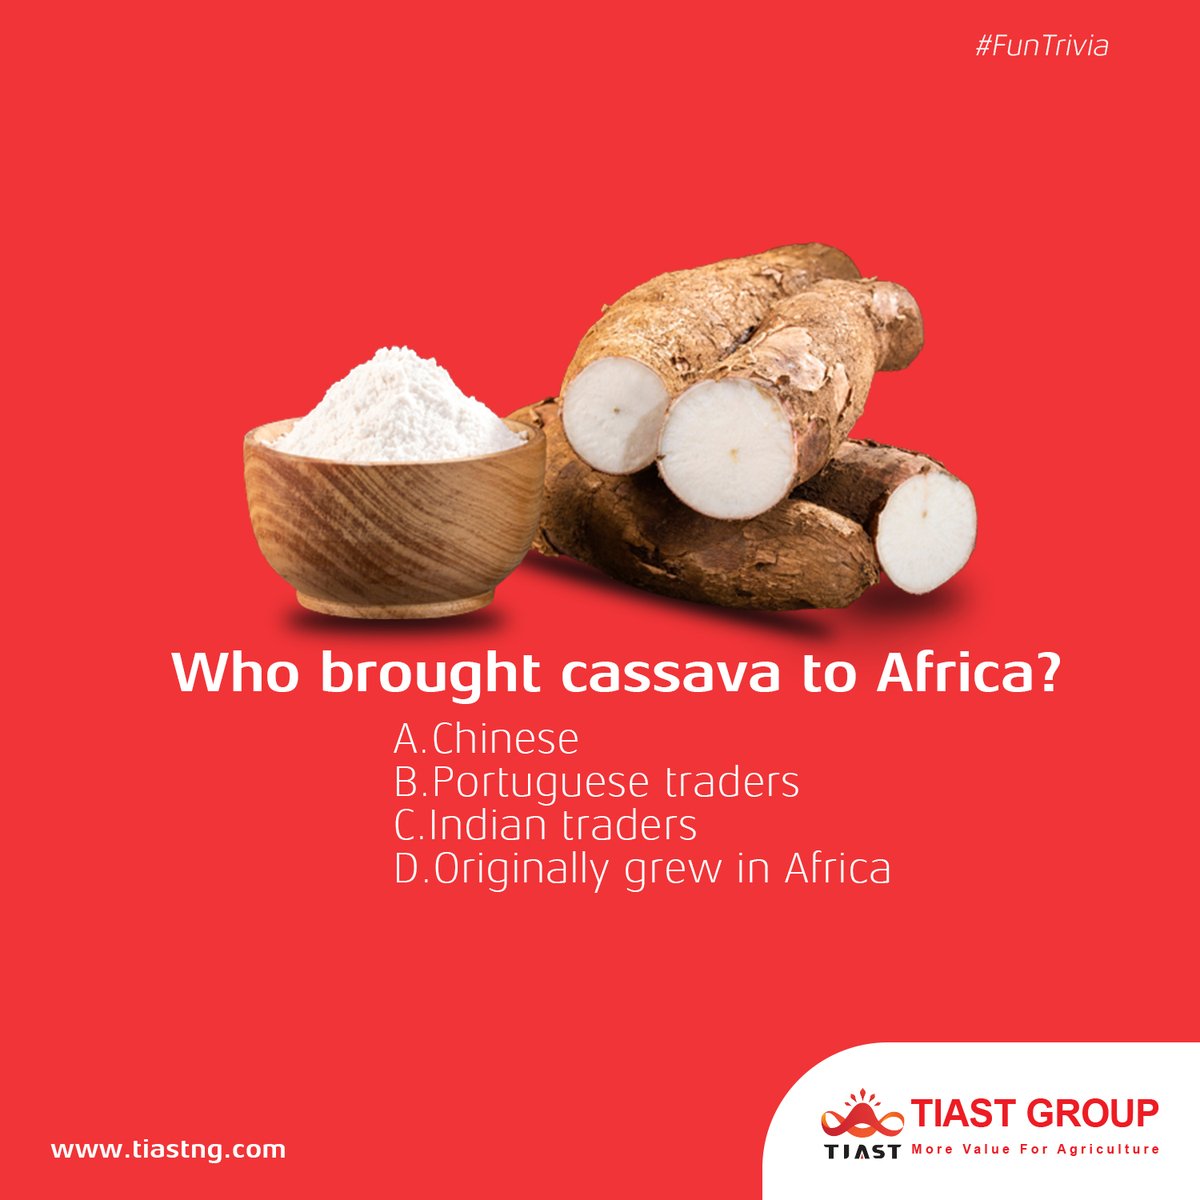 Do you know about the origin of cassava in Africa?
Tell us who brought cassava to Africa.

#africa #cassava #tiastgroup #funtrivia
#industrial  #agriculture  #farming #global
 #factory #machinery  #trade